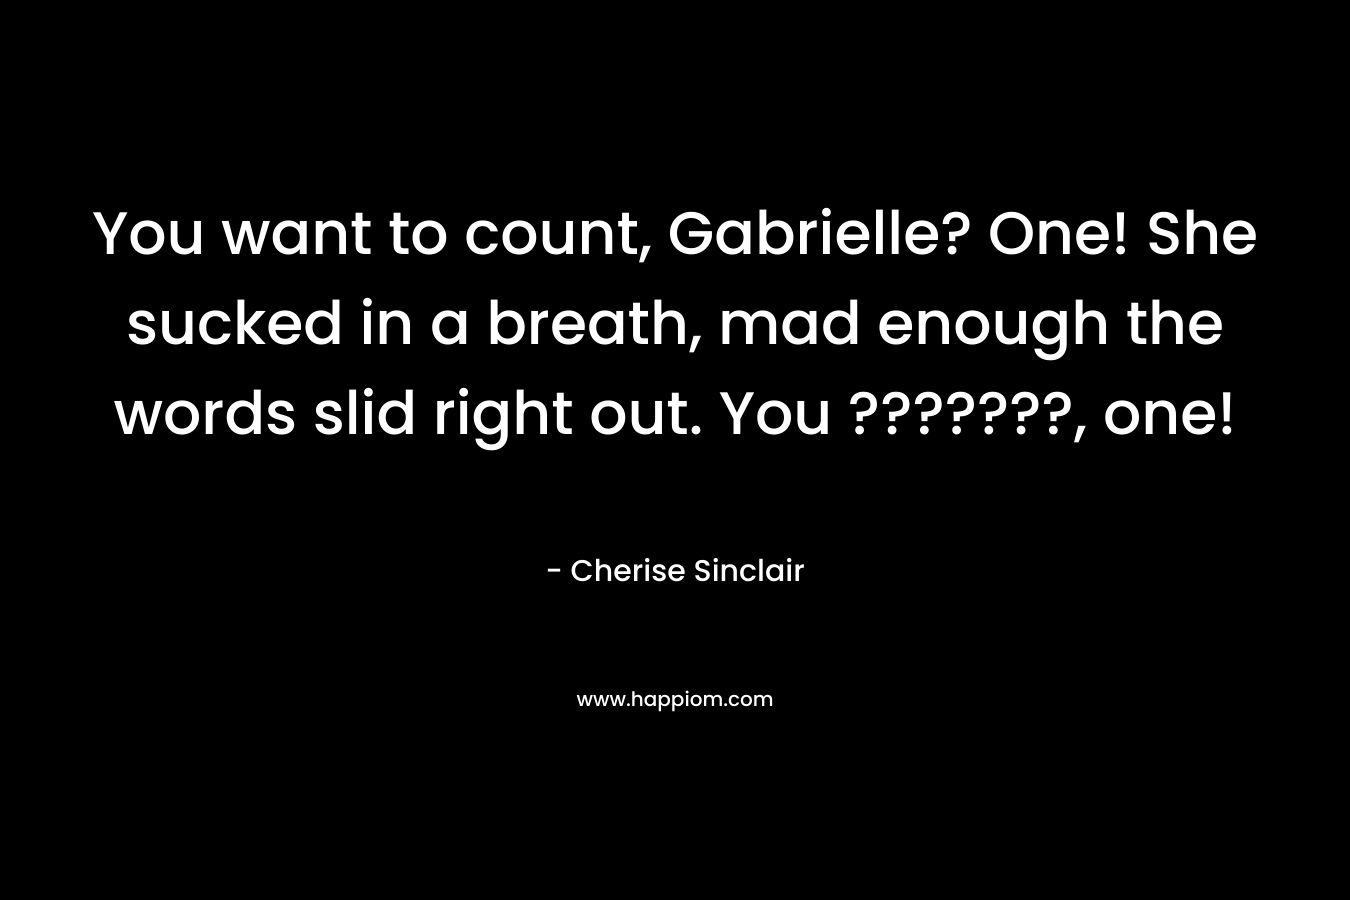 You want to count, Gabrielle? One! She sucked in a breath, mad enough the words slid right out. You ???????, one!